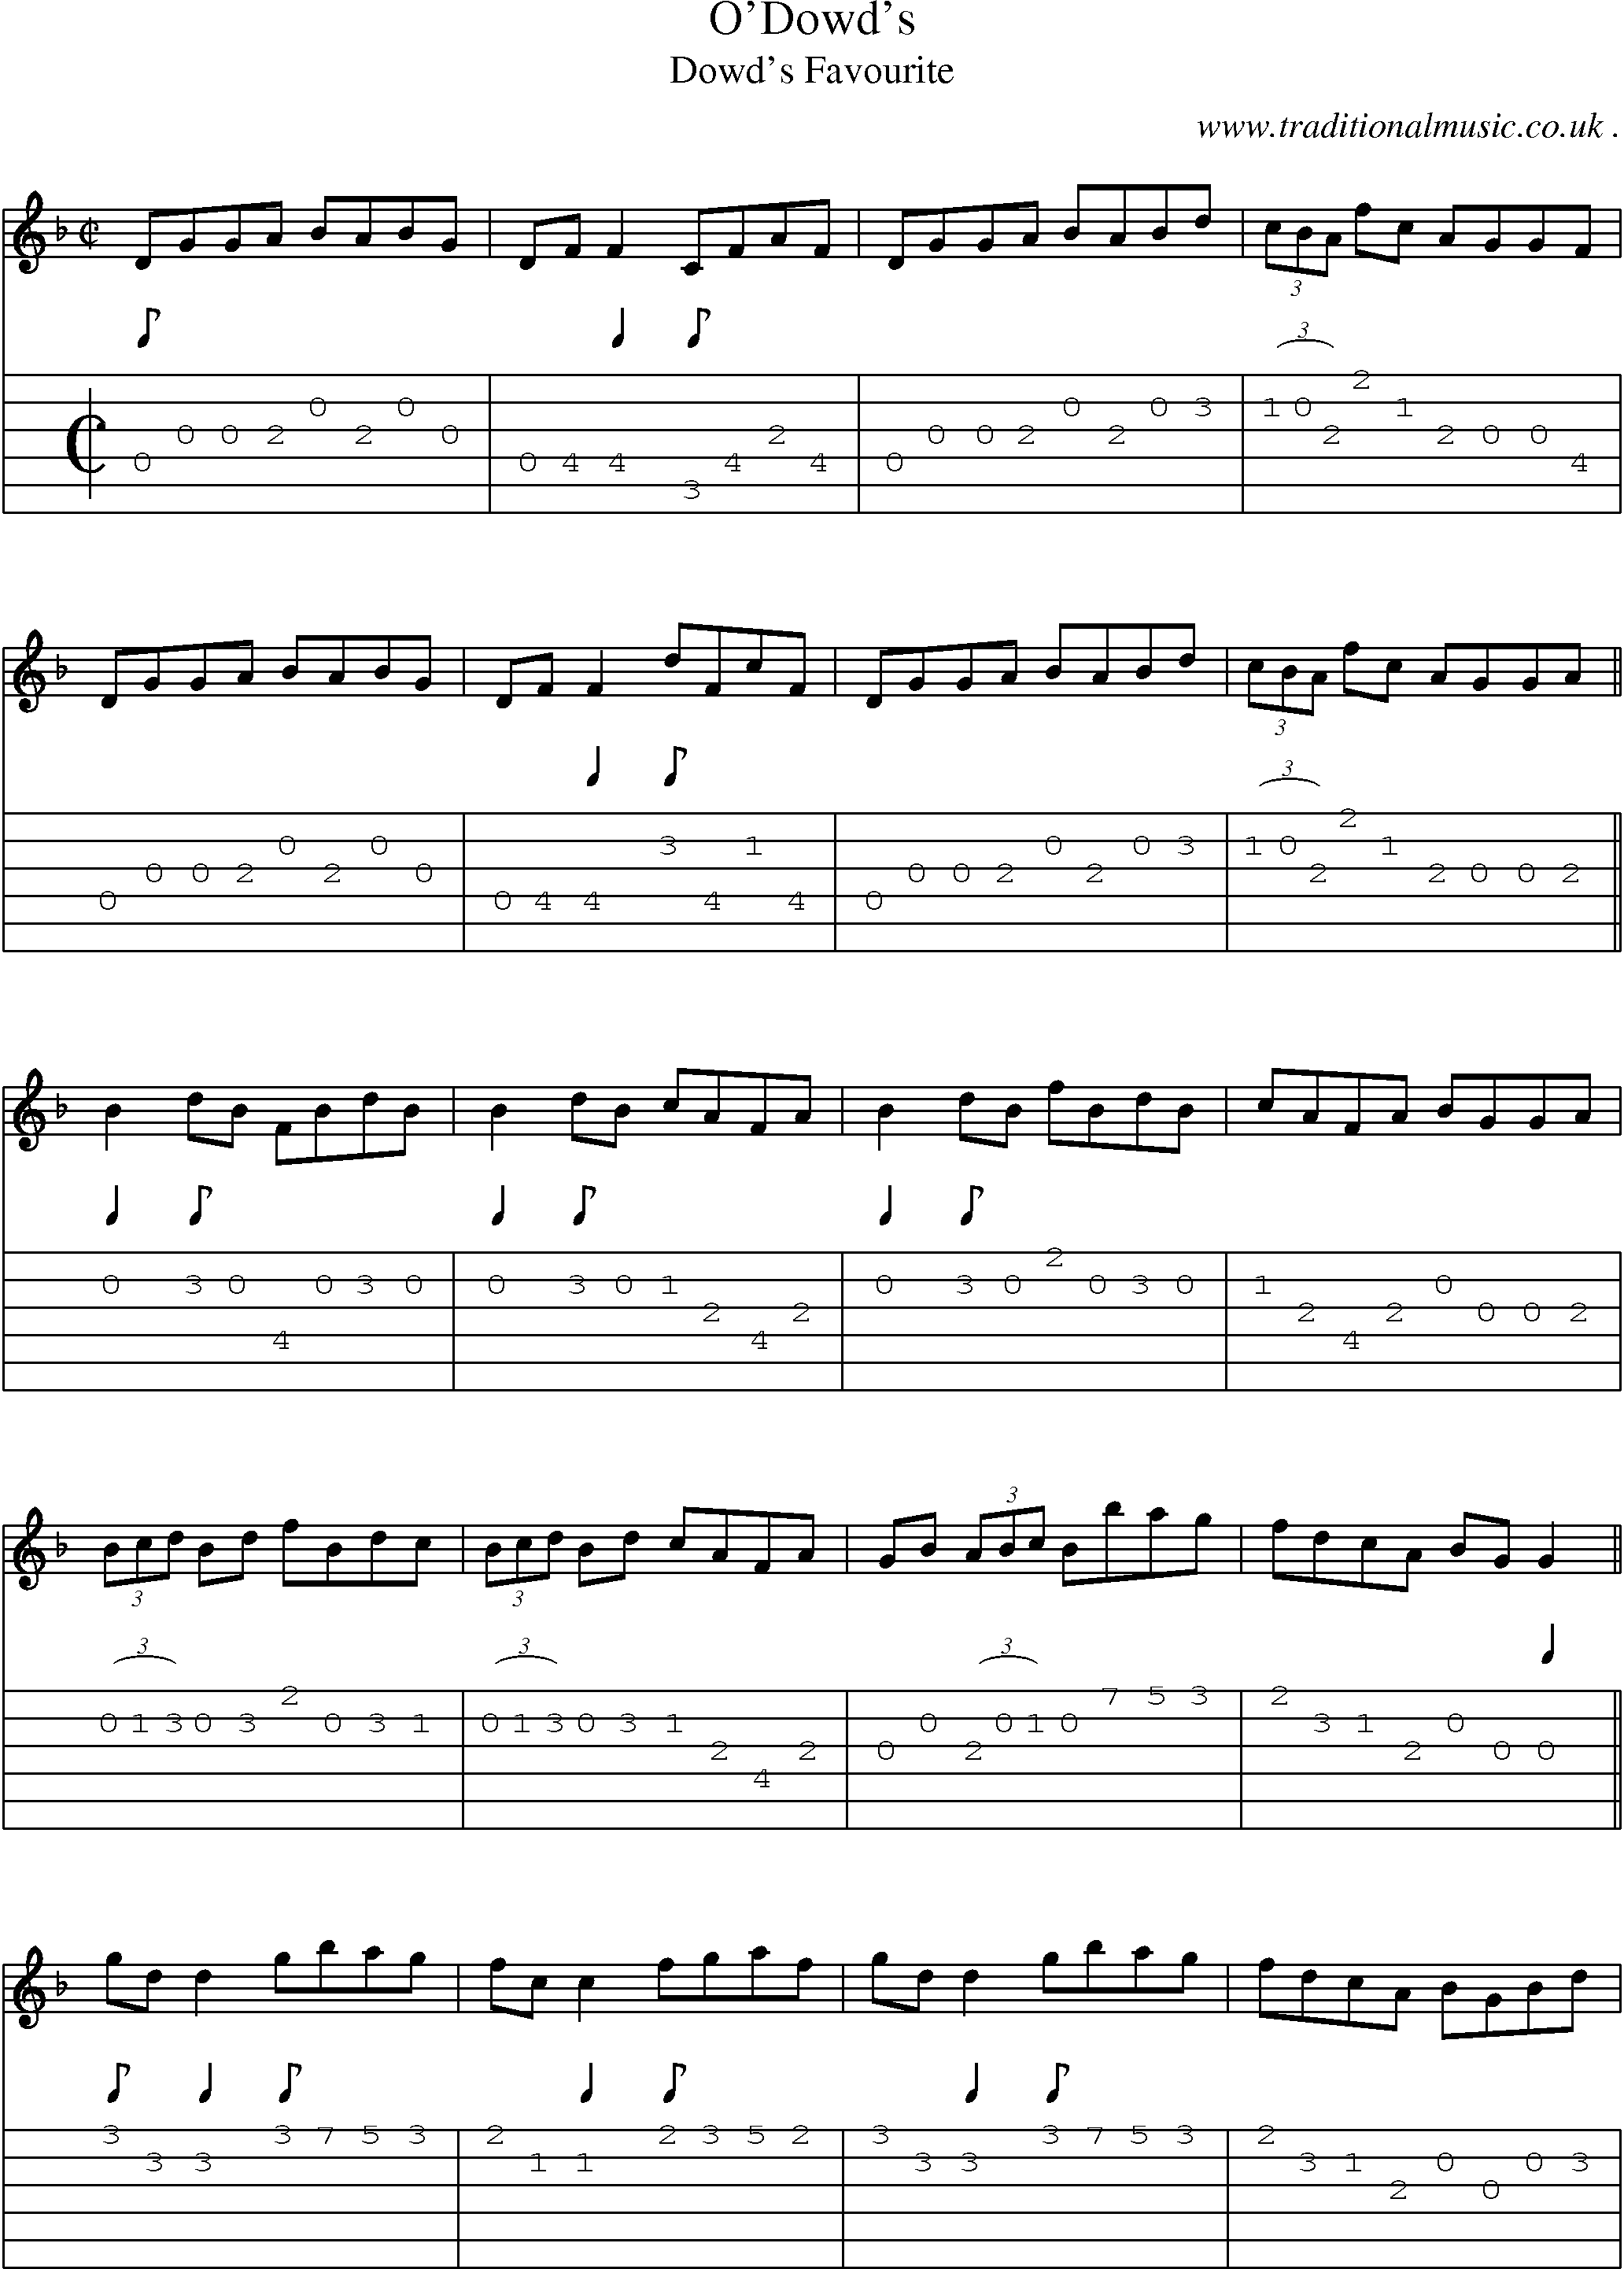 Sheet-Music and Guitar Tabs for Odowds